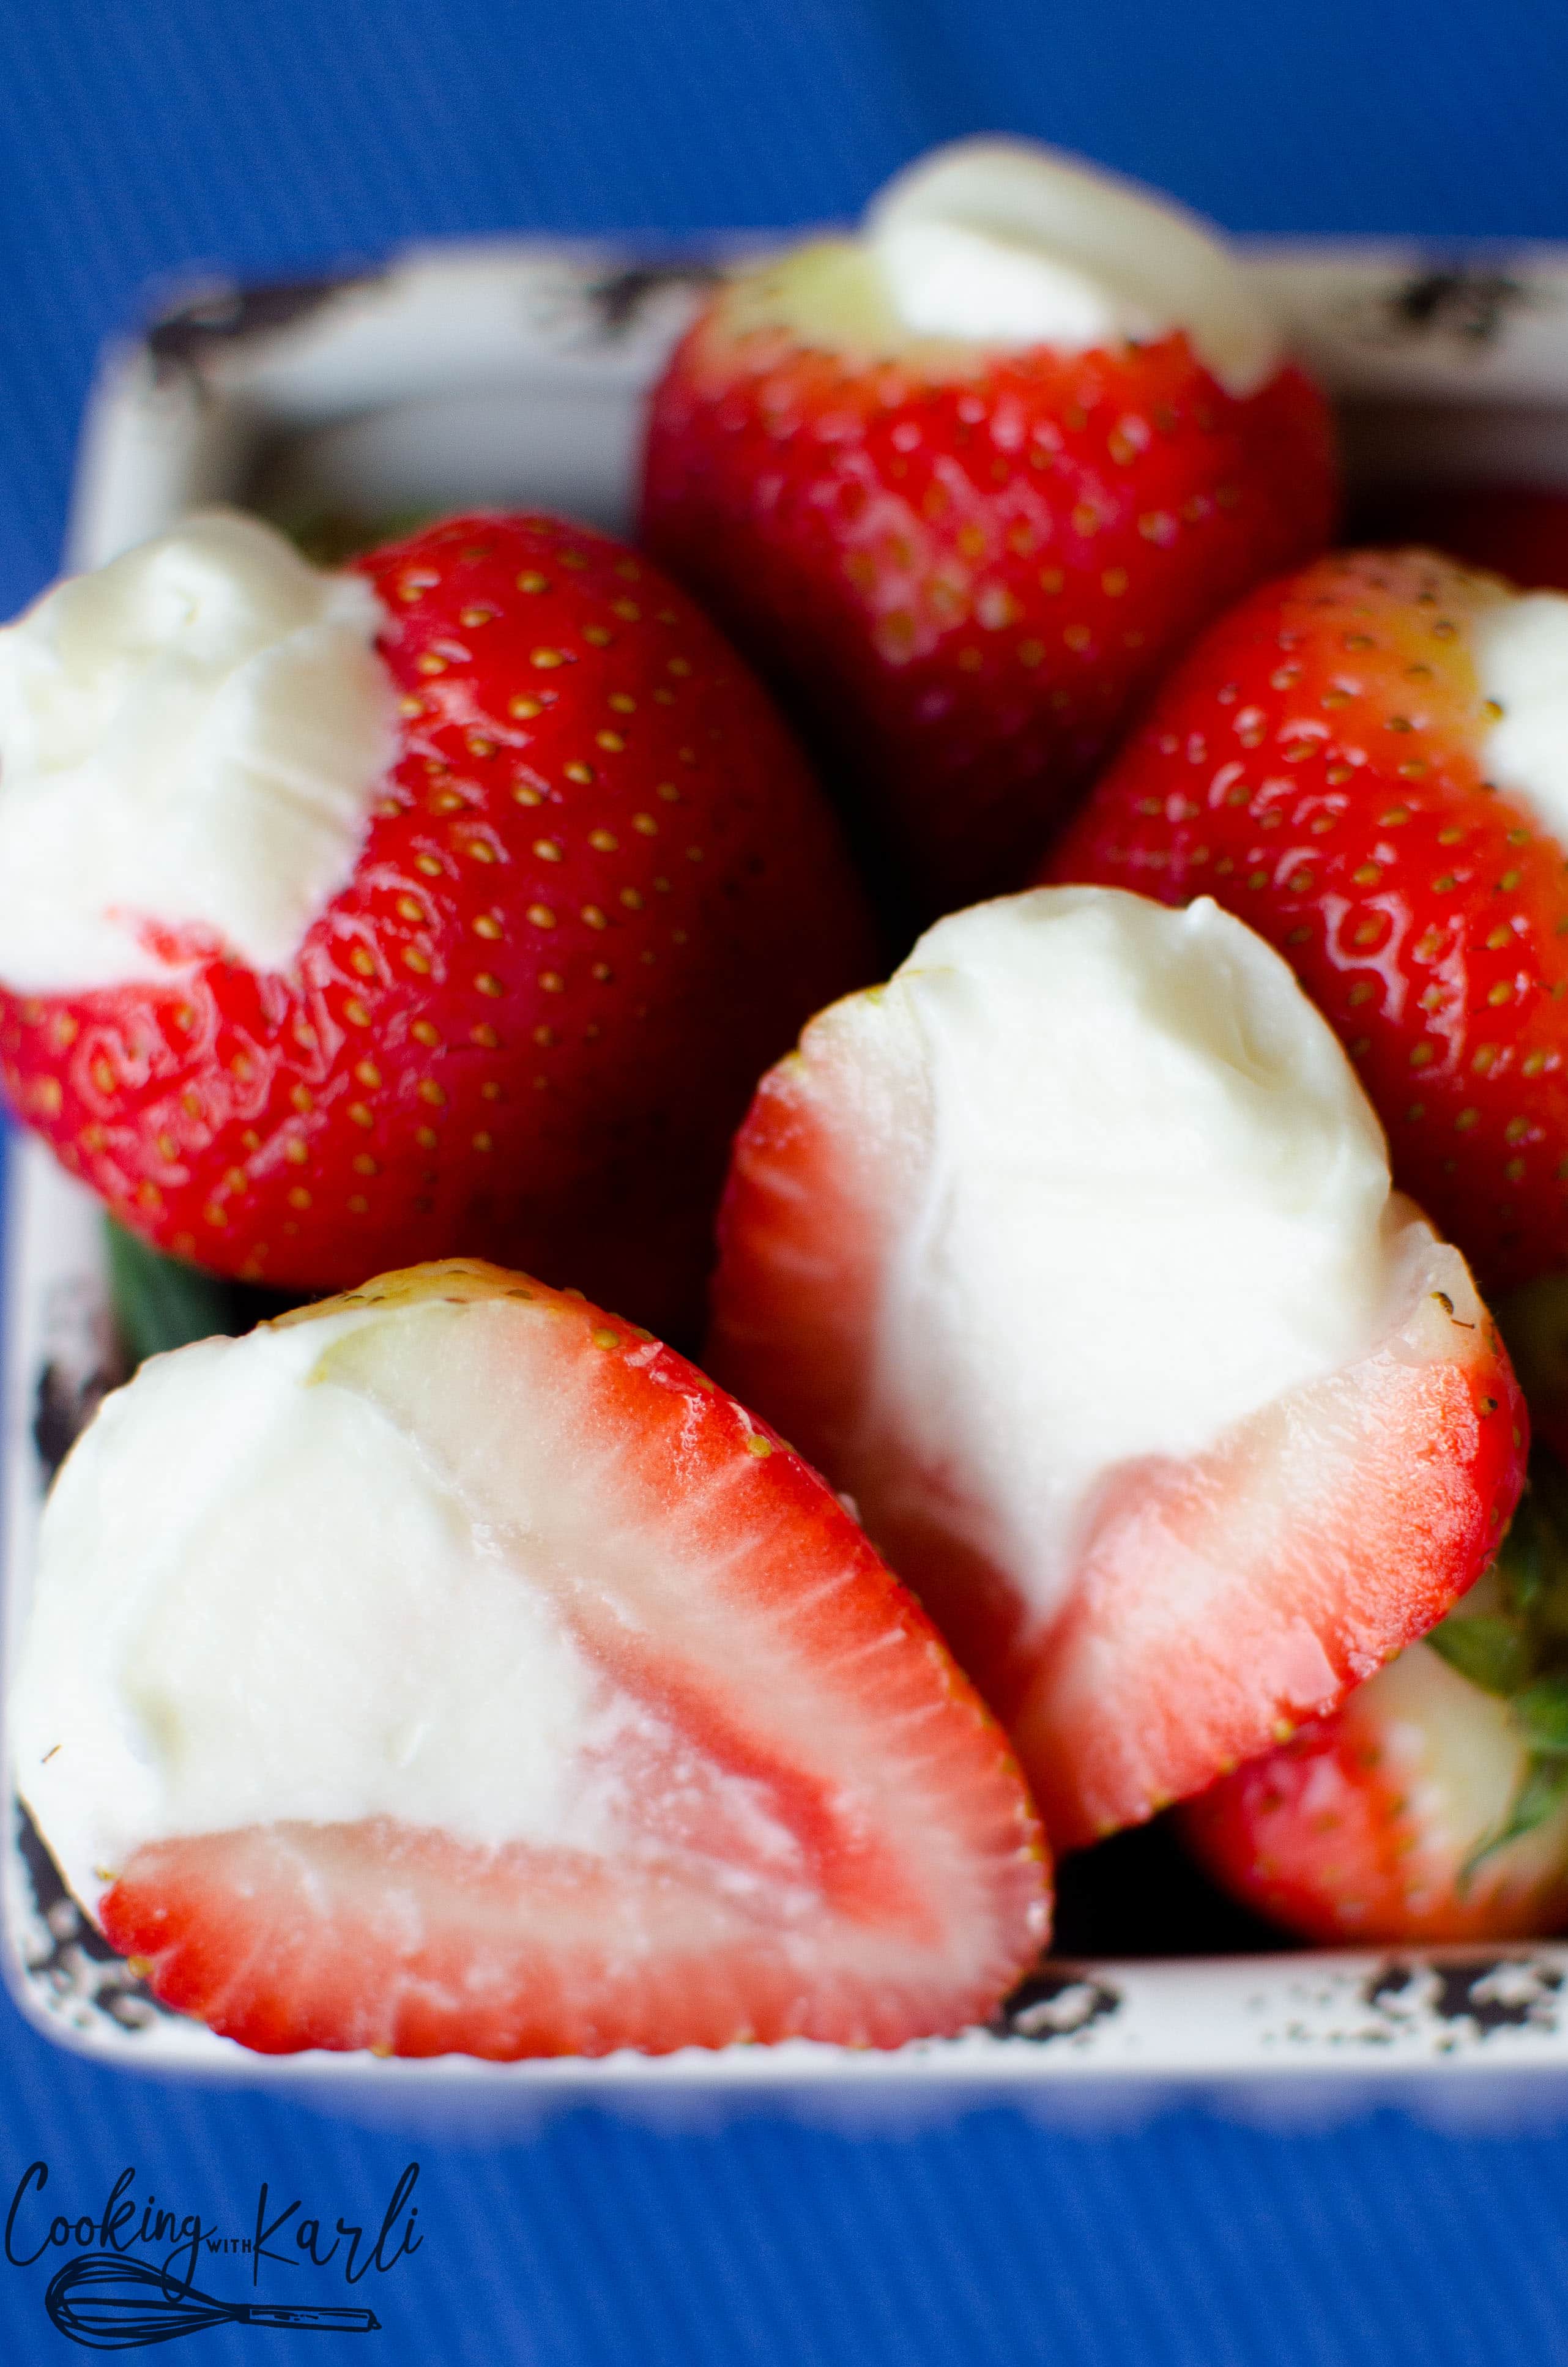 Strawberries 'n Cream are fresh strawberries filled with vanilla whipped cream frosting. This is a delicious, fresh and easy dessert.